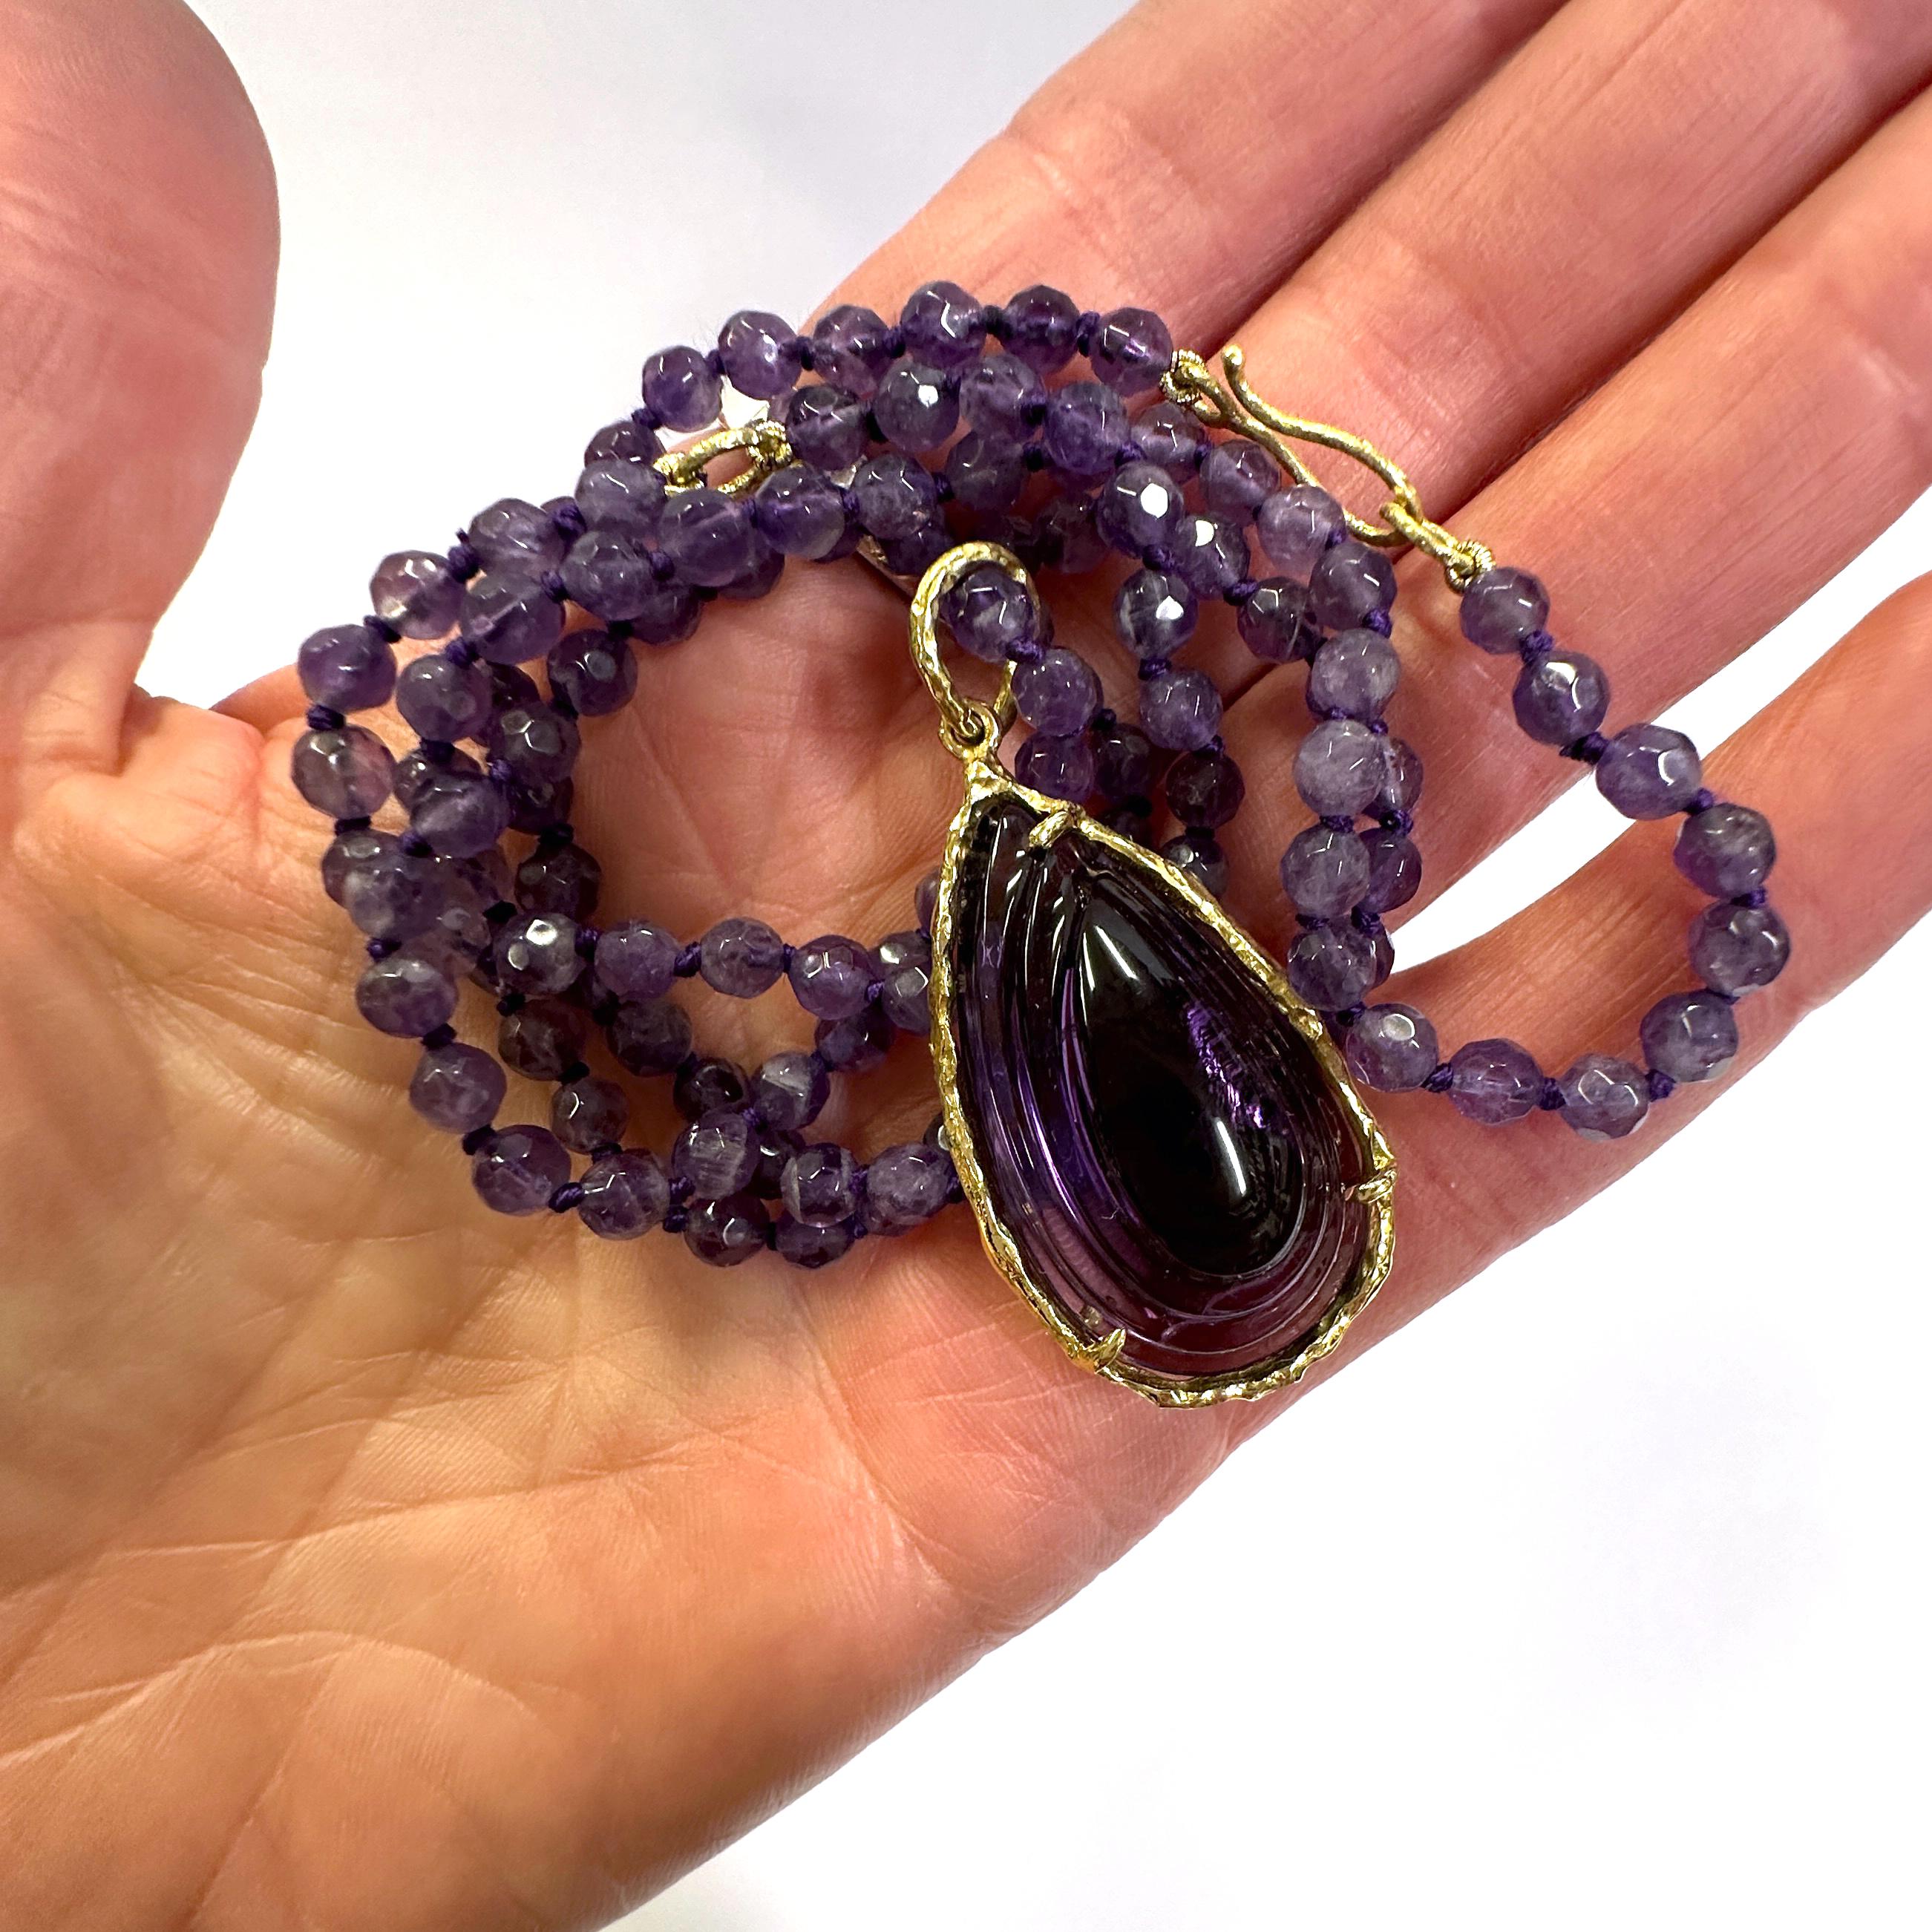 39 Carat Carved Amethyst Pendant in 18K Gold on Convertible Amethyst Bead Chain For Sale 9